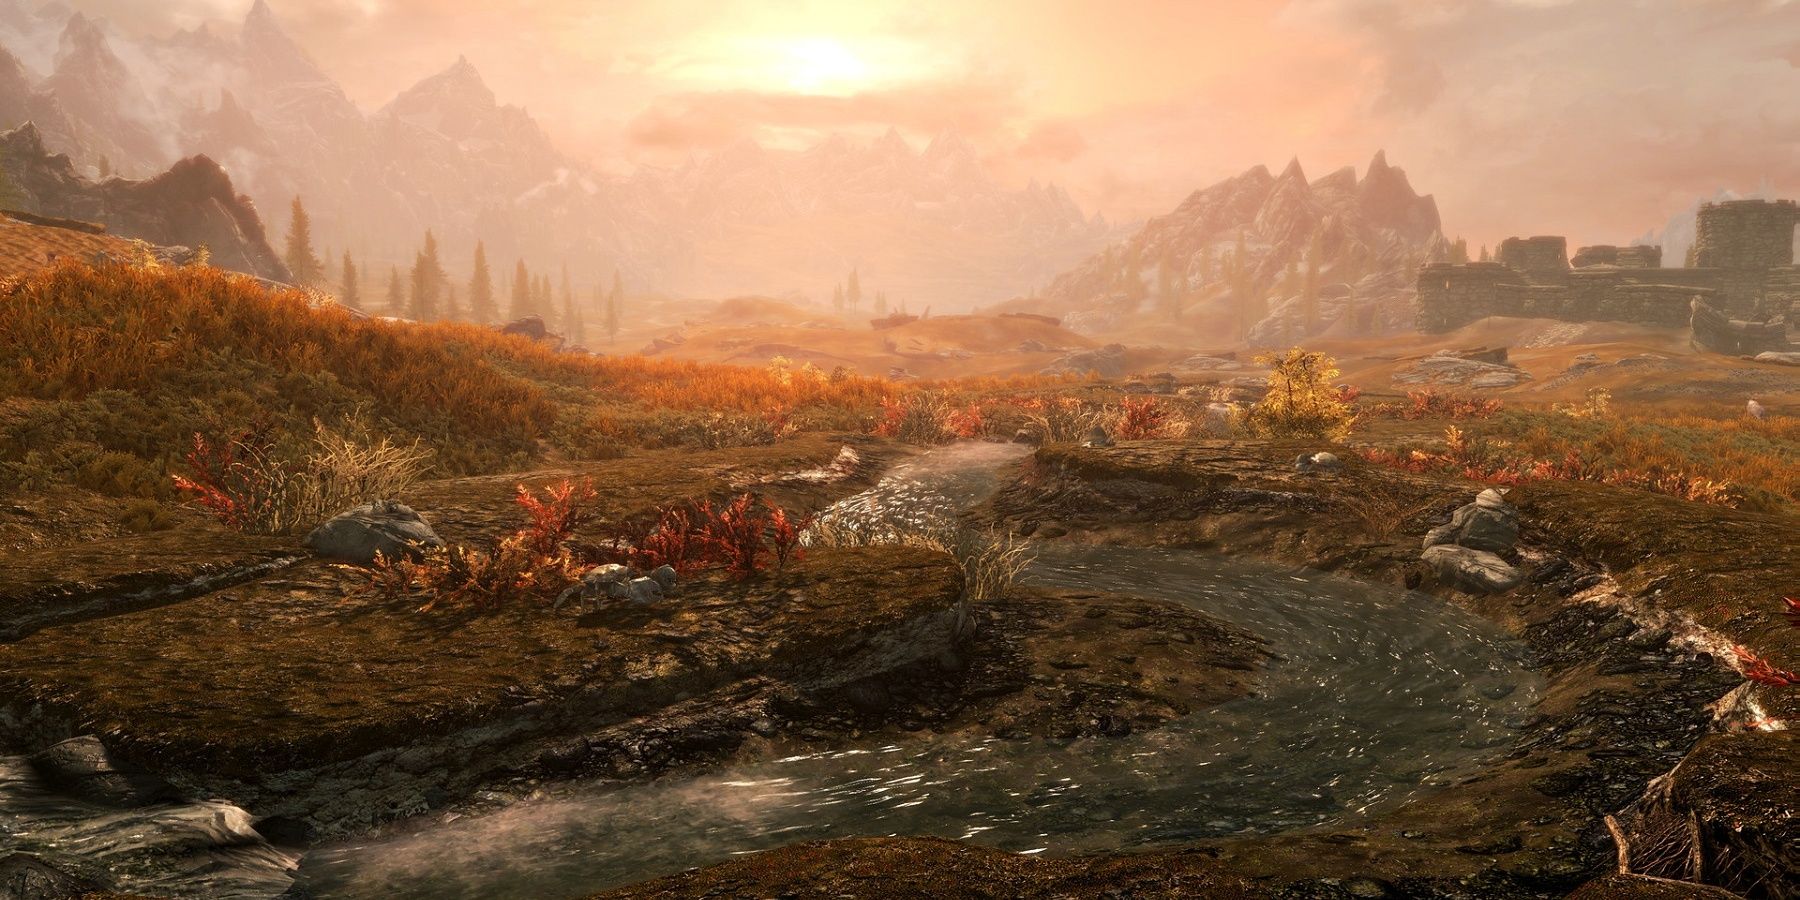 skyrim disccovery about butterflies after 10 years